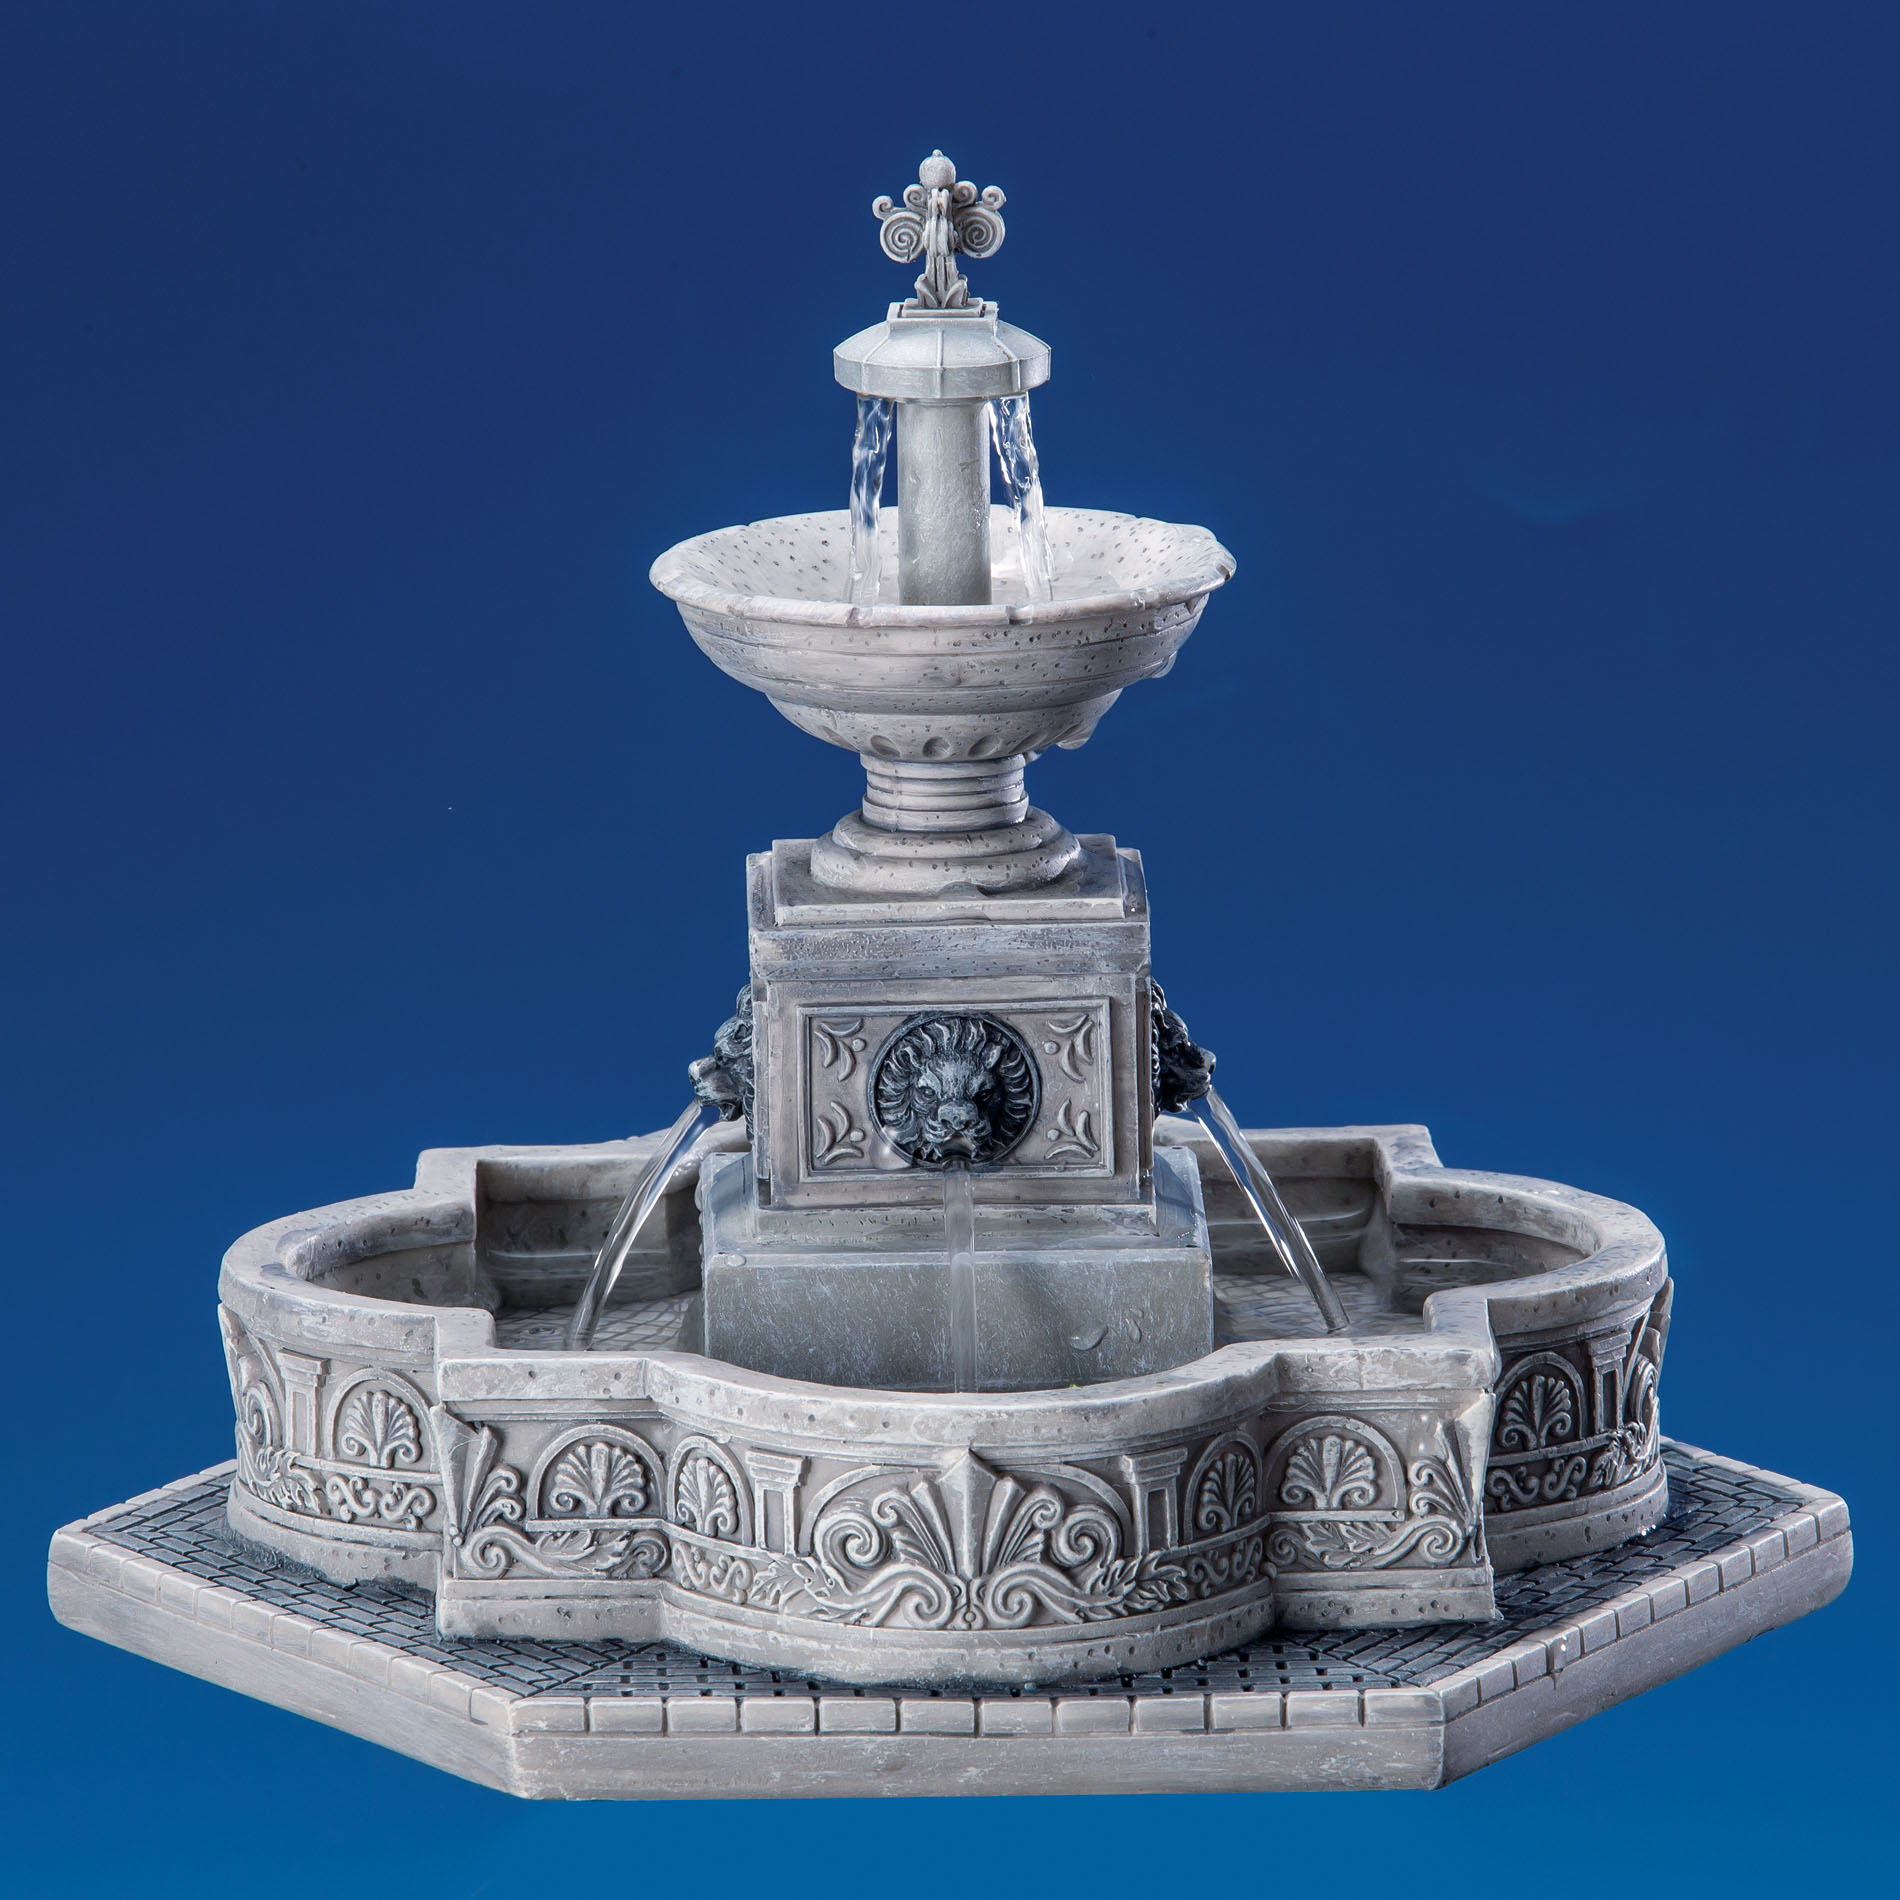 Lemax Village Collection Christmas Village Accessory, Modular Plaza-Fountain, With 4.5V Adaptor